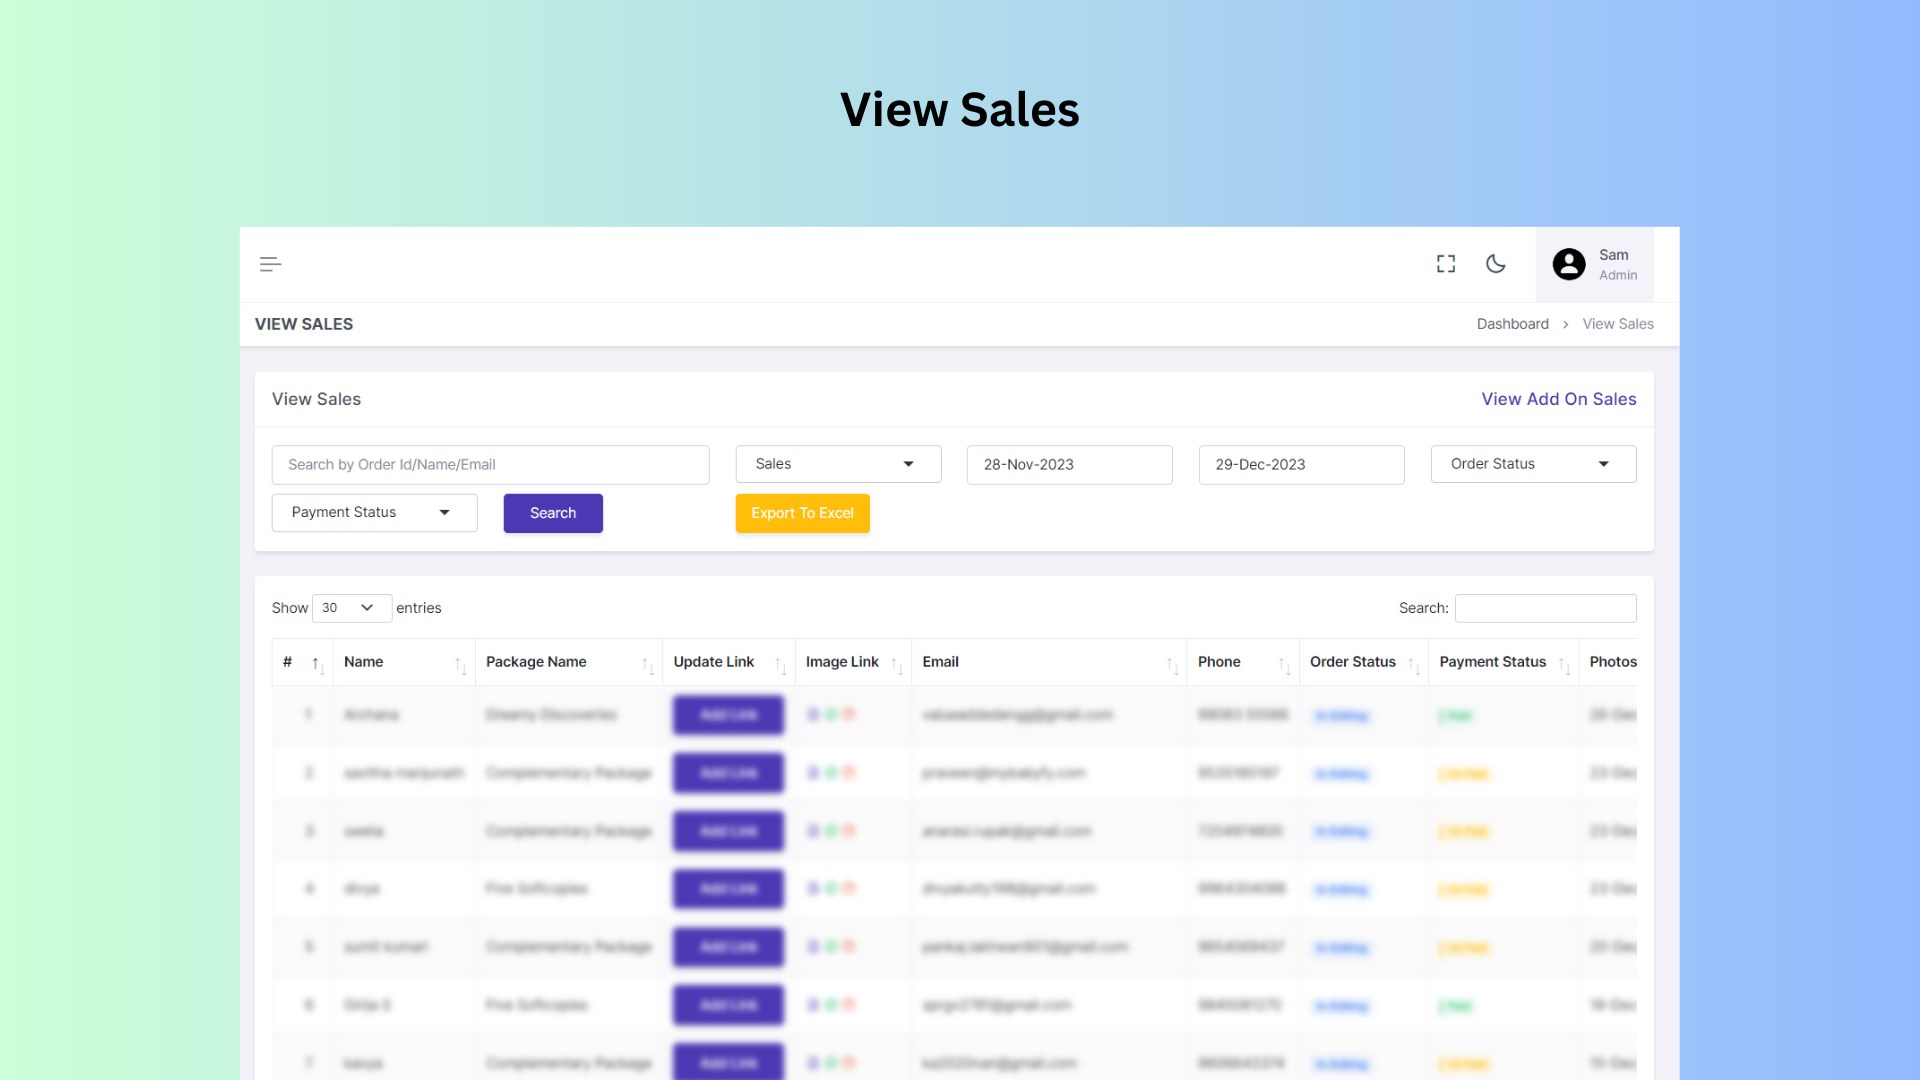 Feature that allows users to view all sales in one place, with convenient filters such as date, order status, order ID, and user name etc.